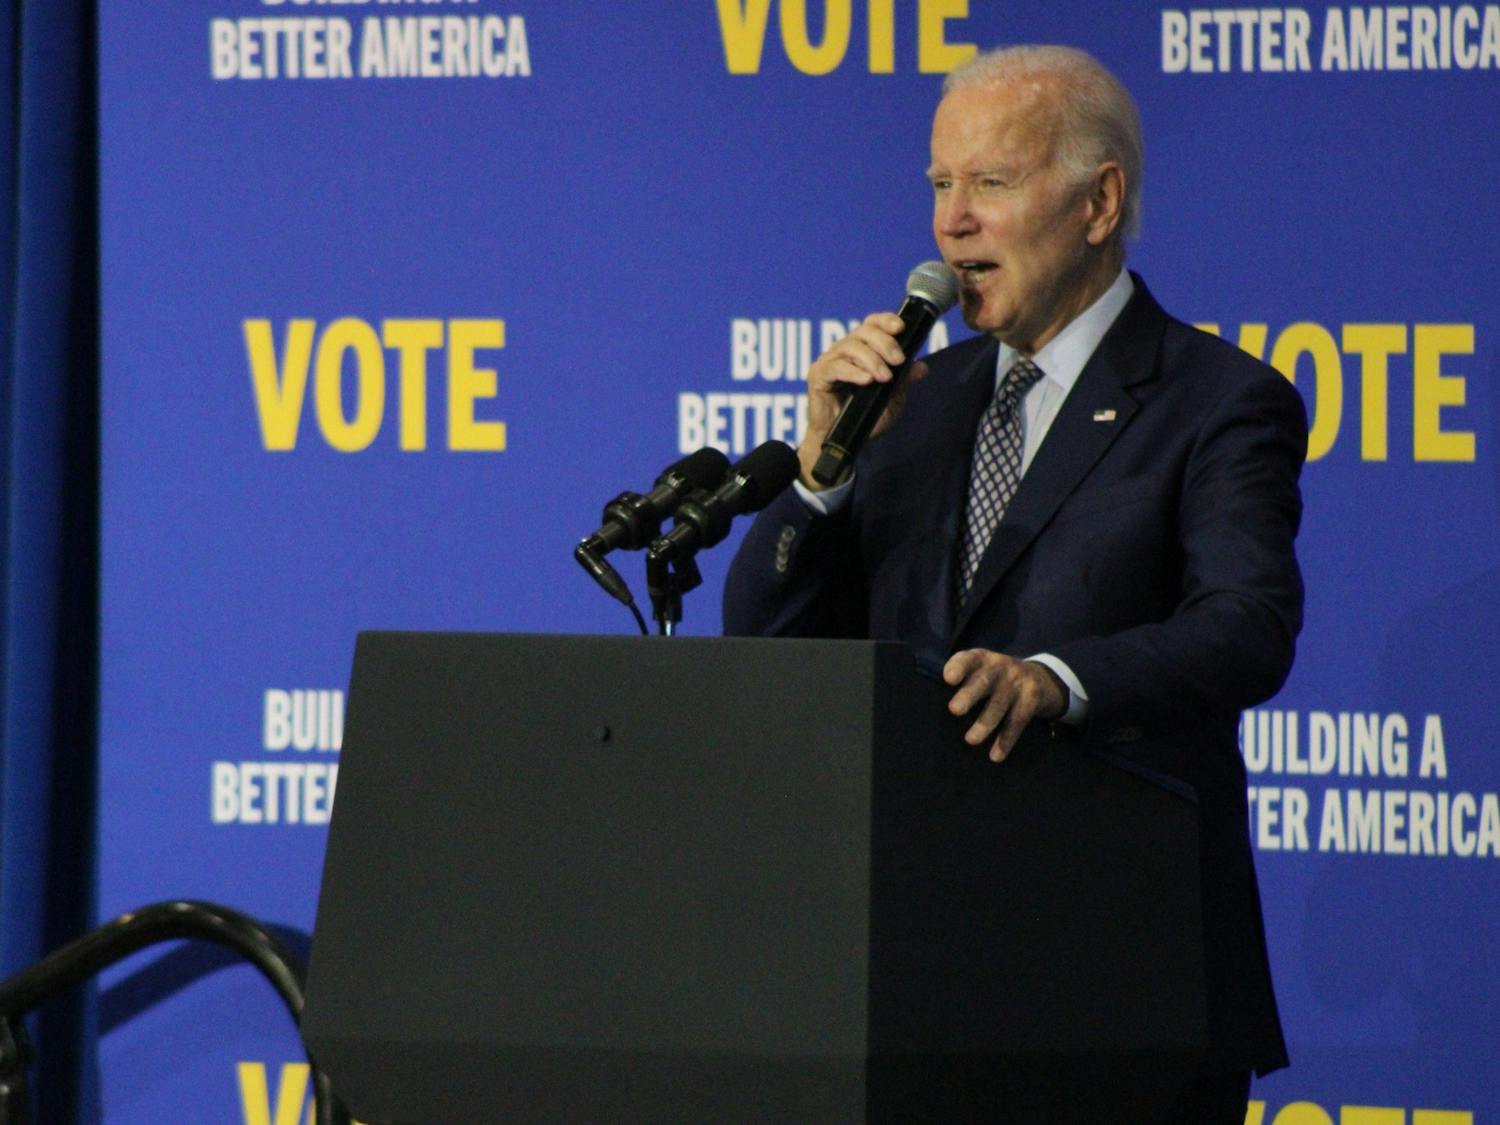 GALLERY: President Joe Biden visits Albuquerque in support of Campaigns for New Mexico Governor Michelle Lujan Grisham